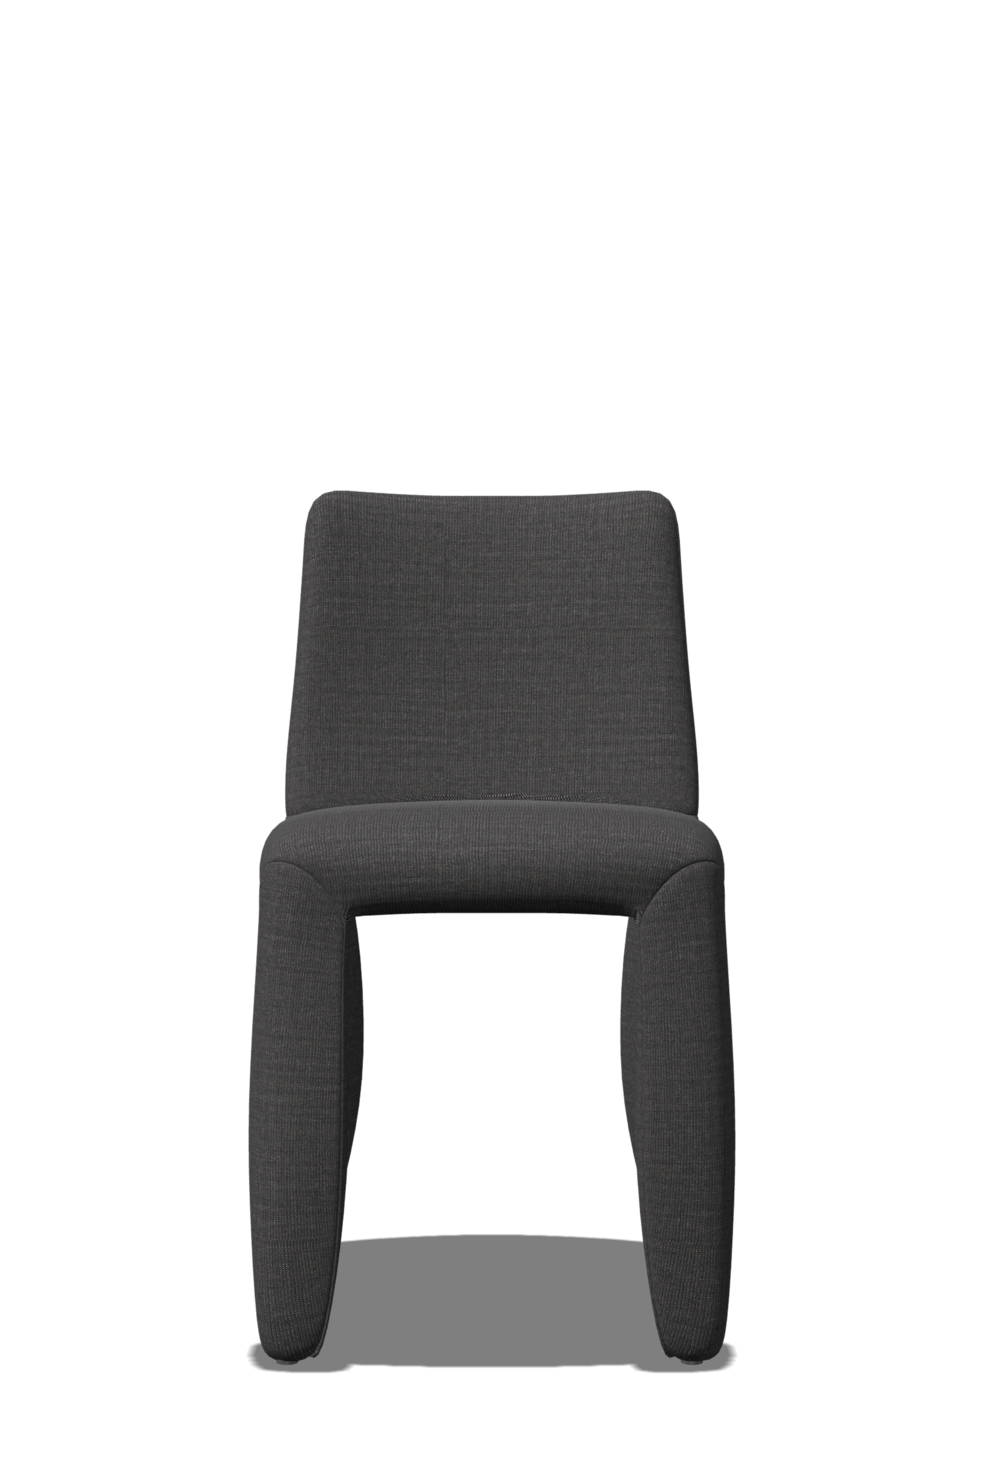 Monster Chair no arms no stitching grey